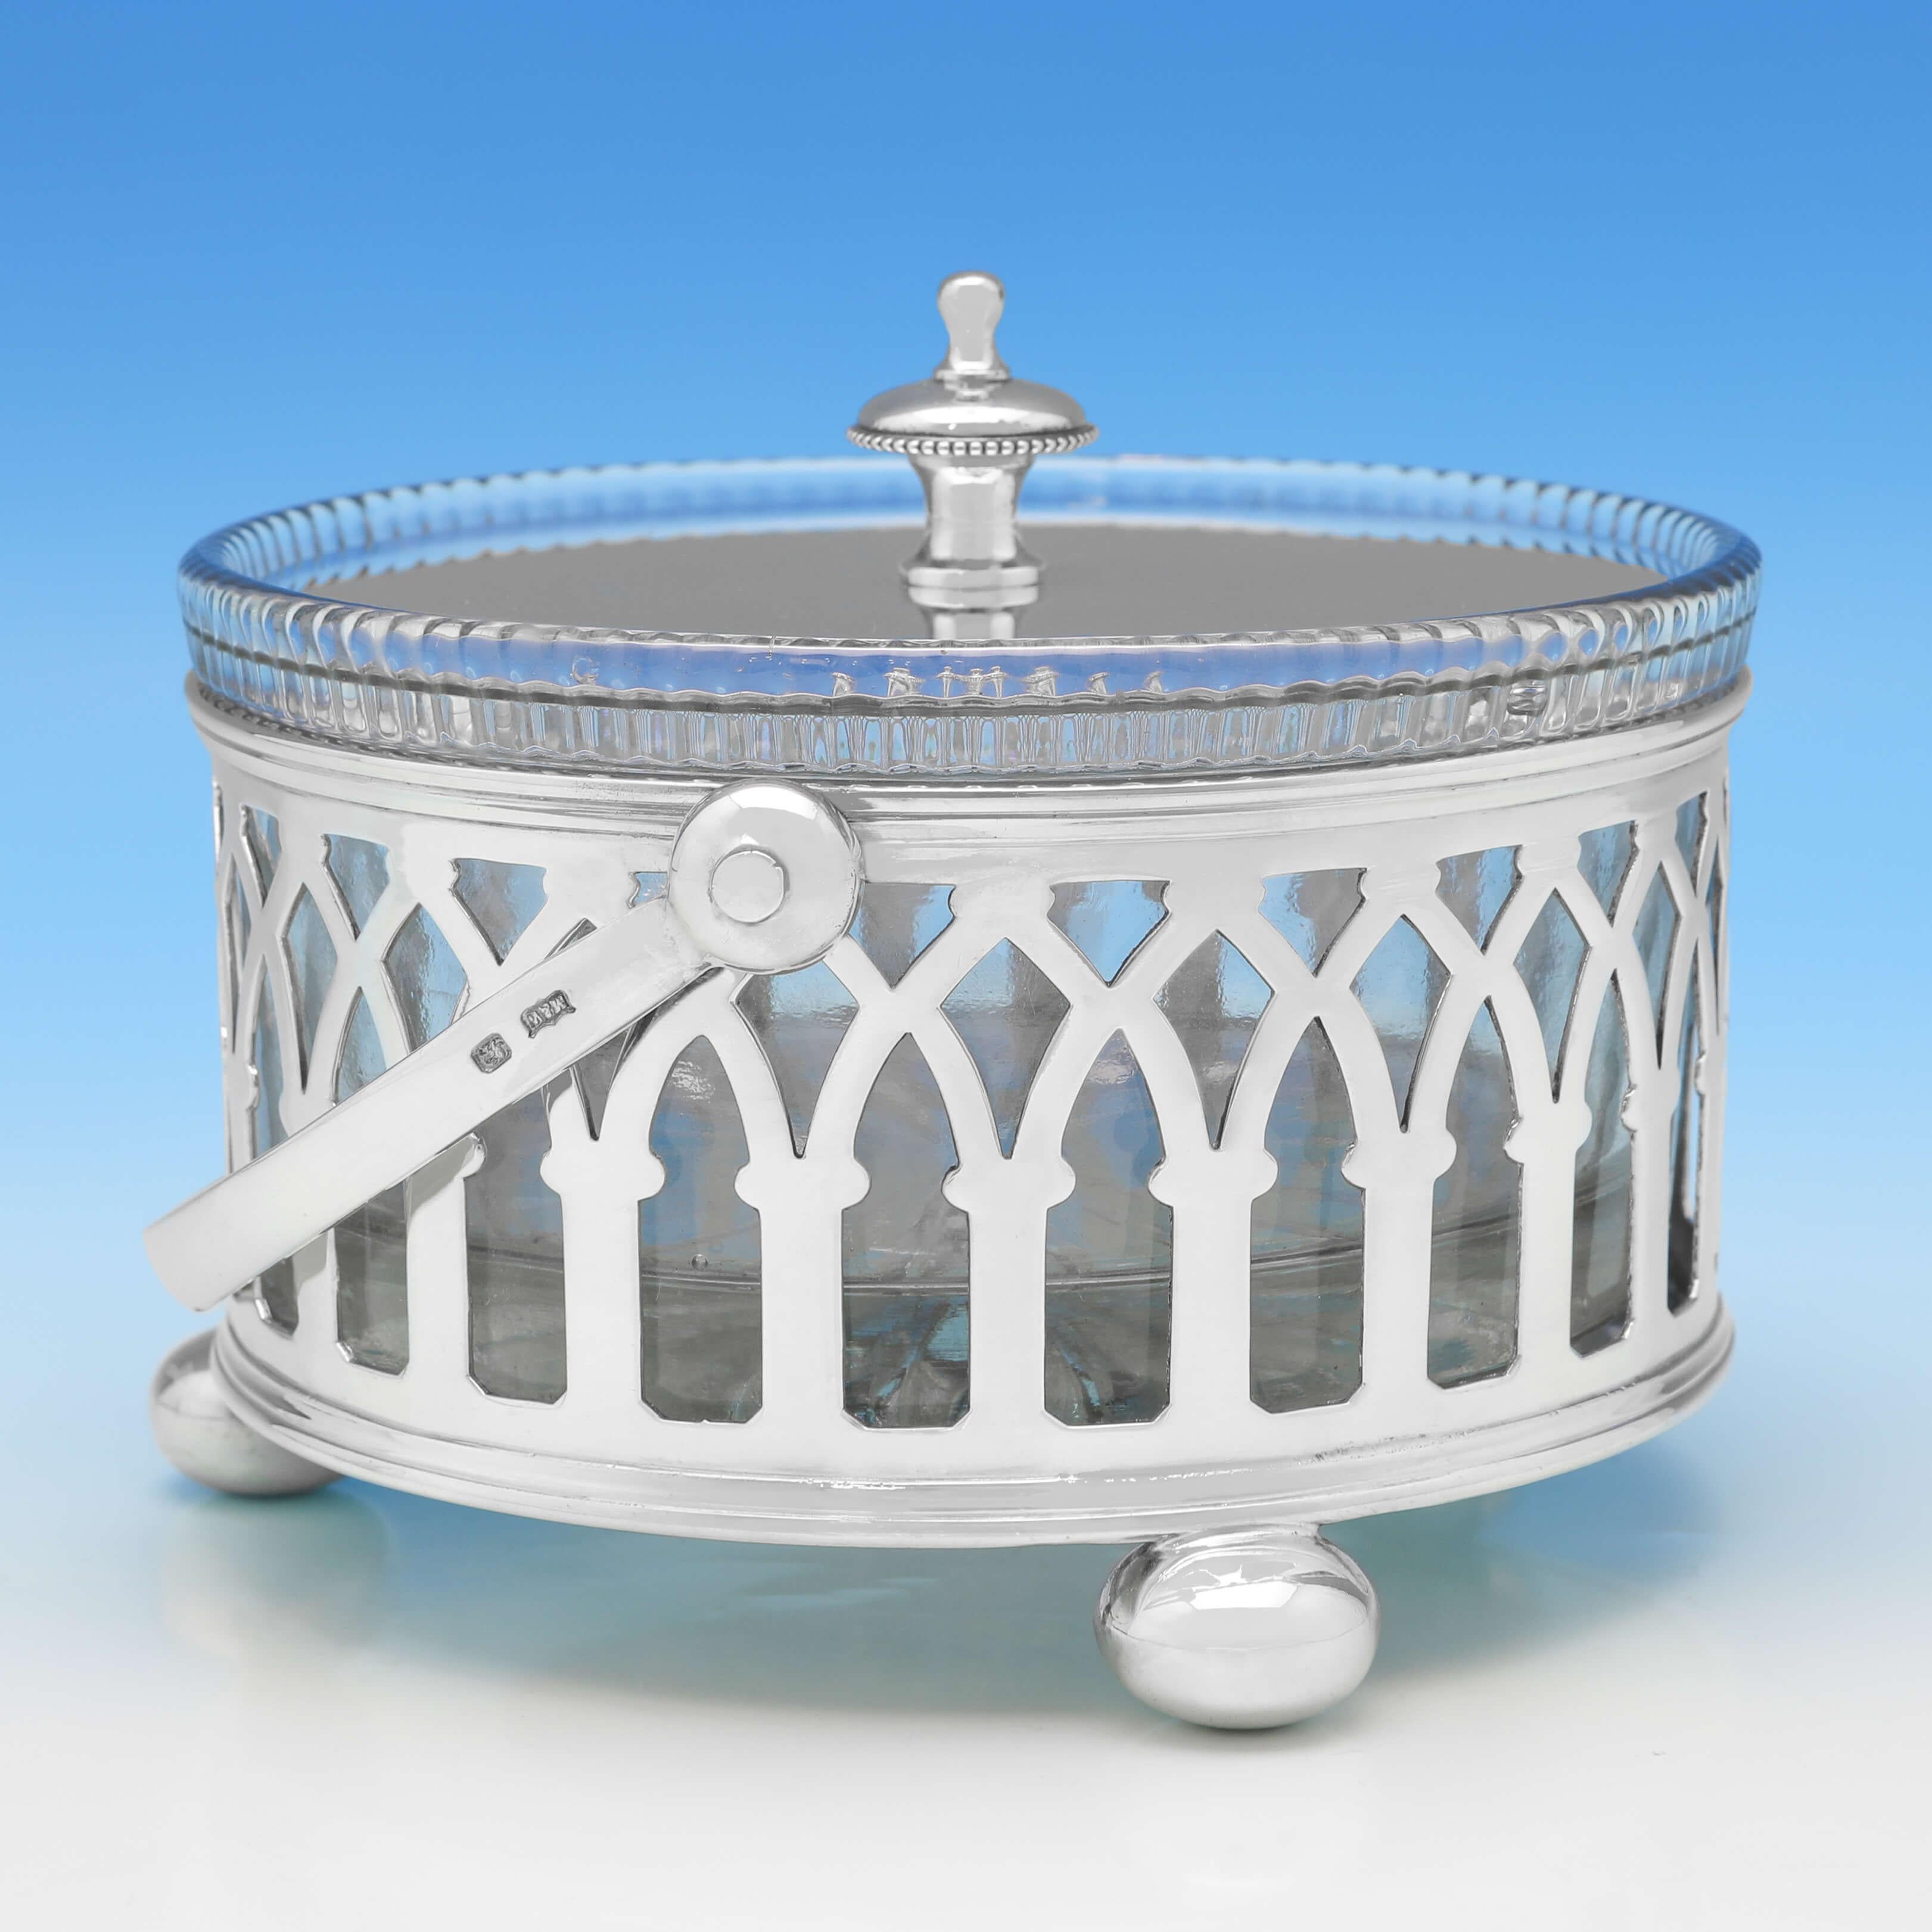 Hallmarked in Sheffield in 1915 by Mappin & Webb, this handsome, antique sterling silver butter dish, stands on ball feet, and features Gothic revival pierce work to the sides, a swing handle, and a glass liner. The butter dish measures 4